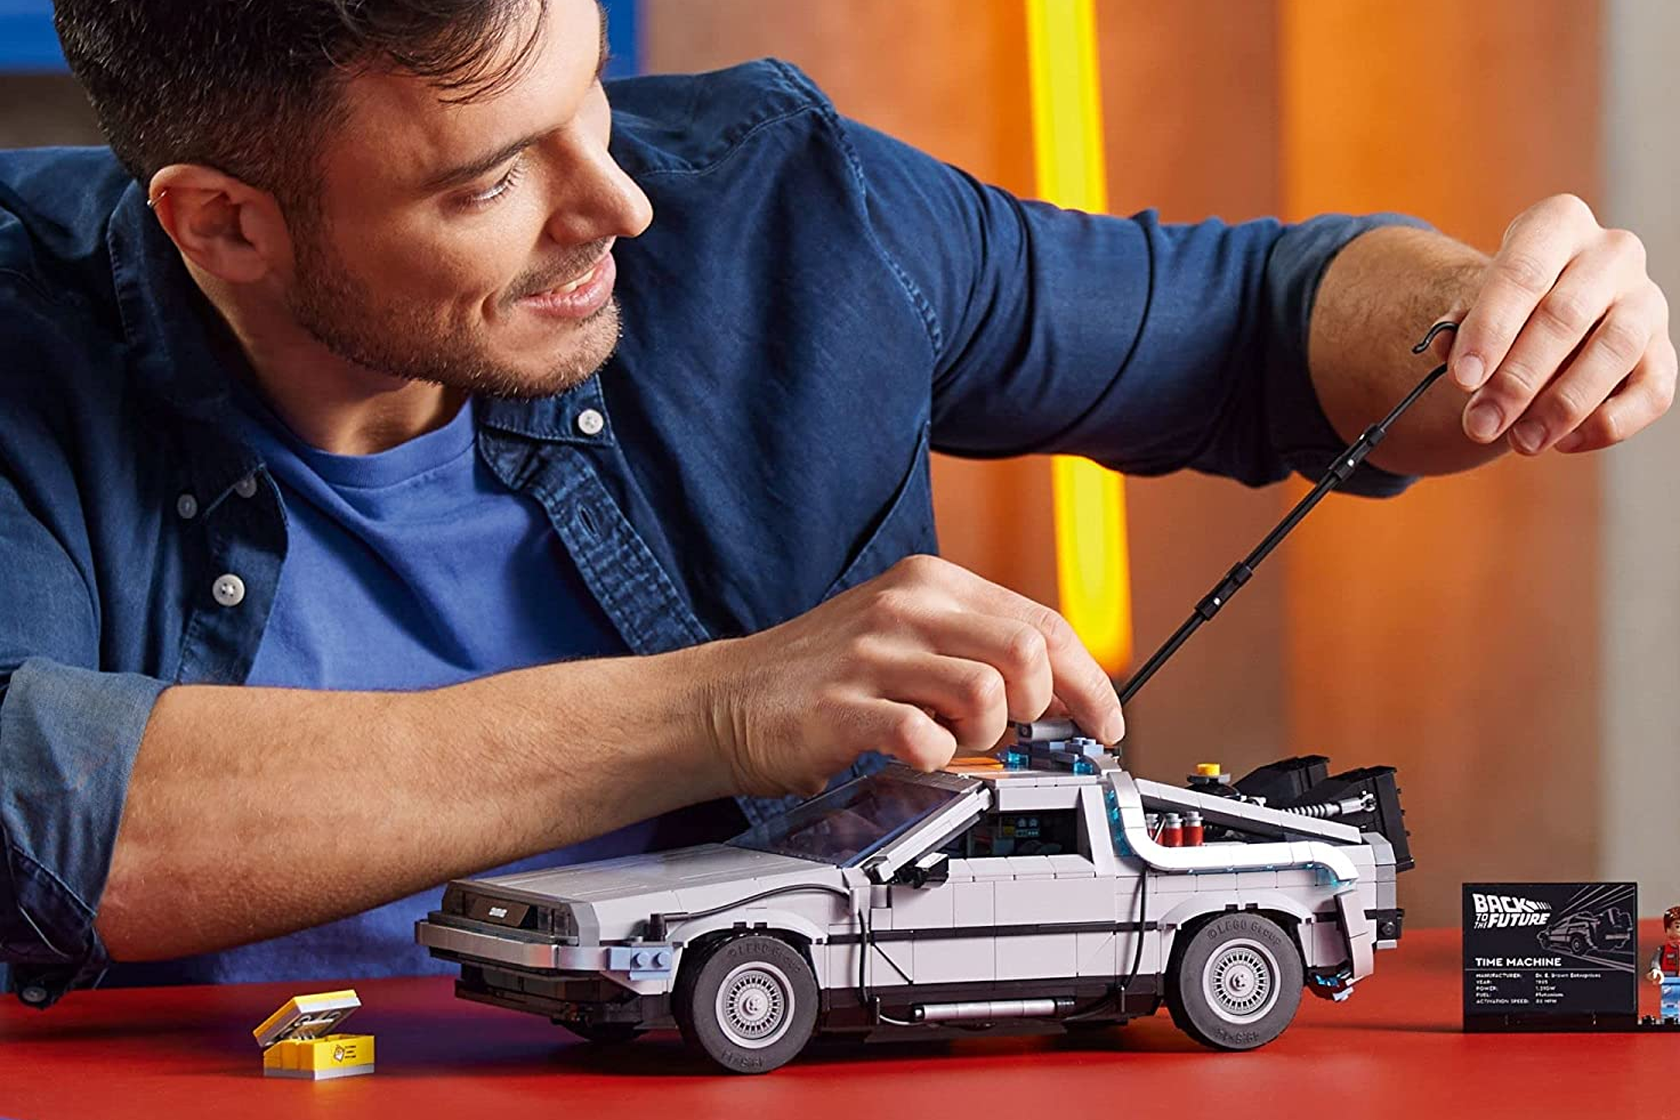 Relive 'Back to the Future' with the Time Machine LEGO set, on